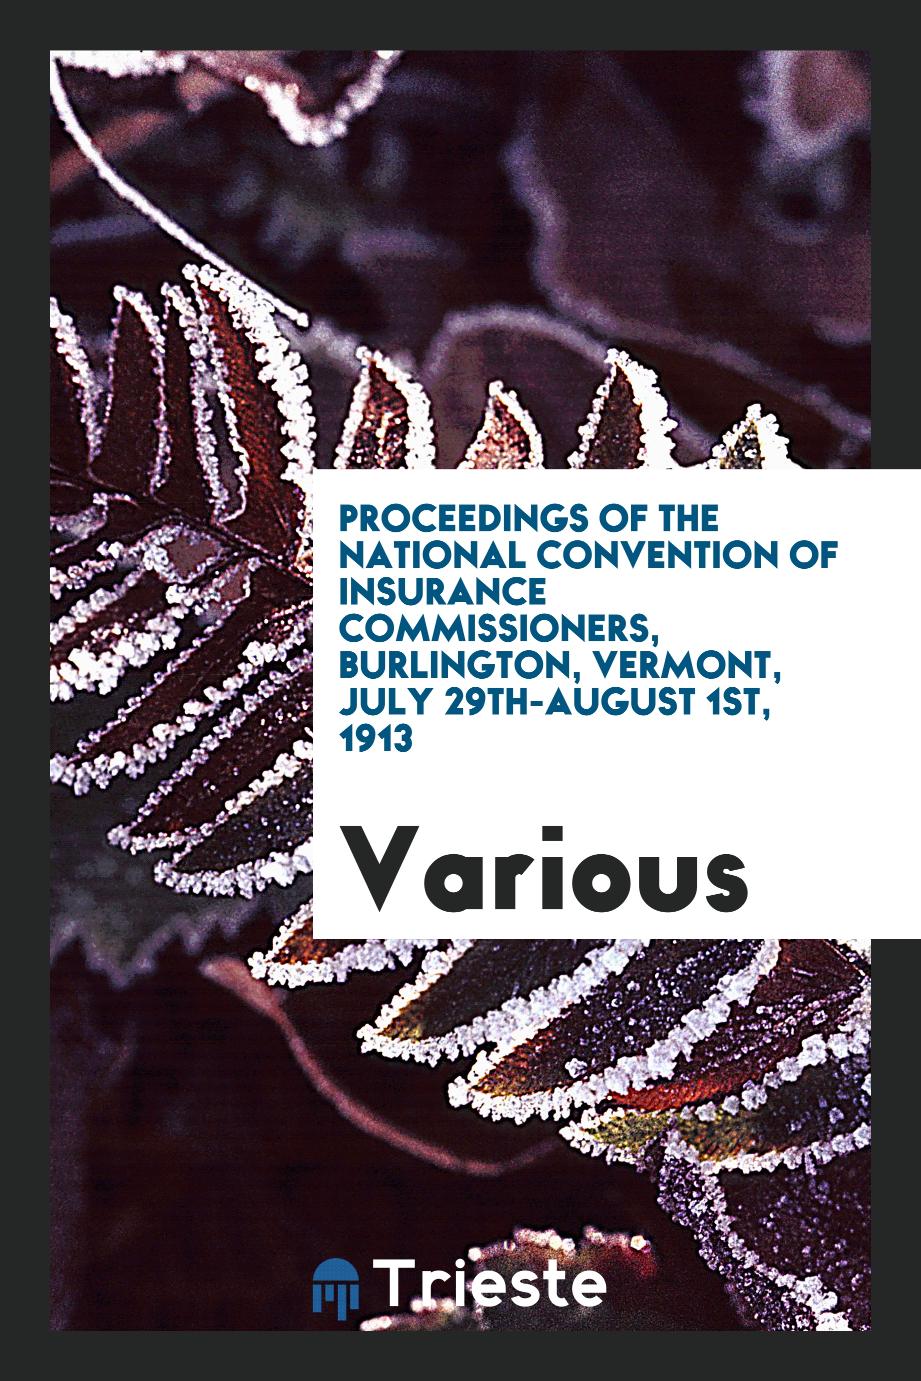 Proceedings of the National Convention of Insurance Commissioners, Burlington, Vermont, July 29th-August 1st, 1913